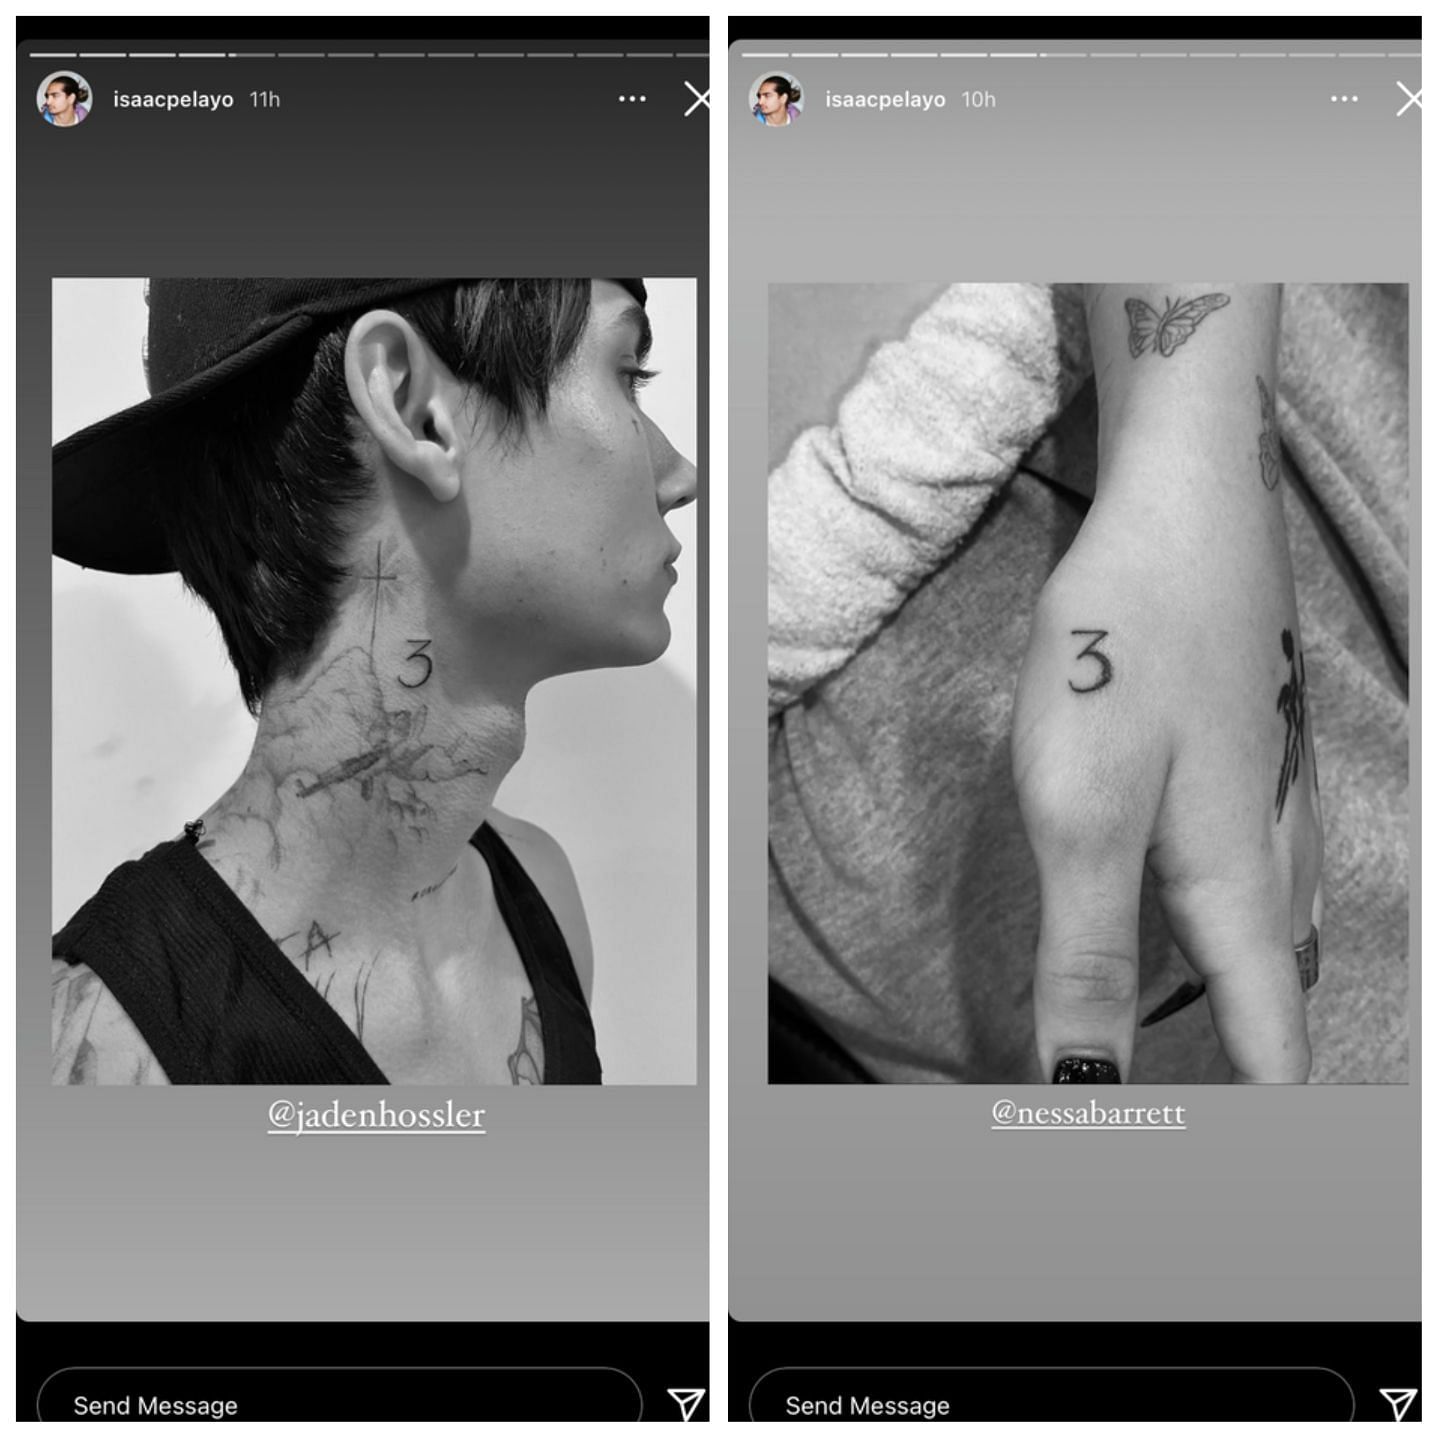 The couple got two matching tattoos at the time they were together. (Image via @issacpelayo/ Instagram)